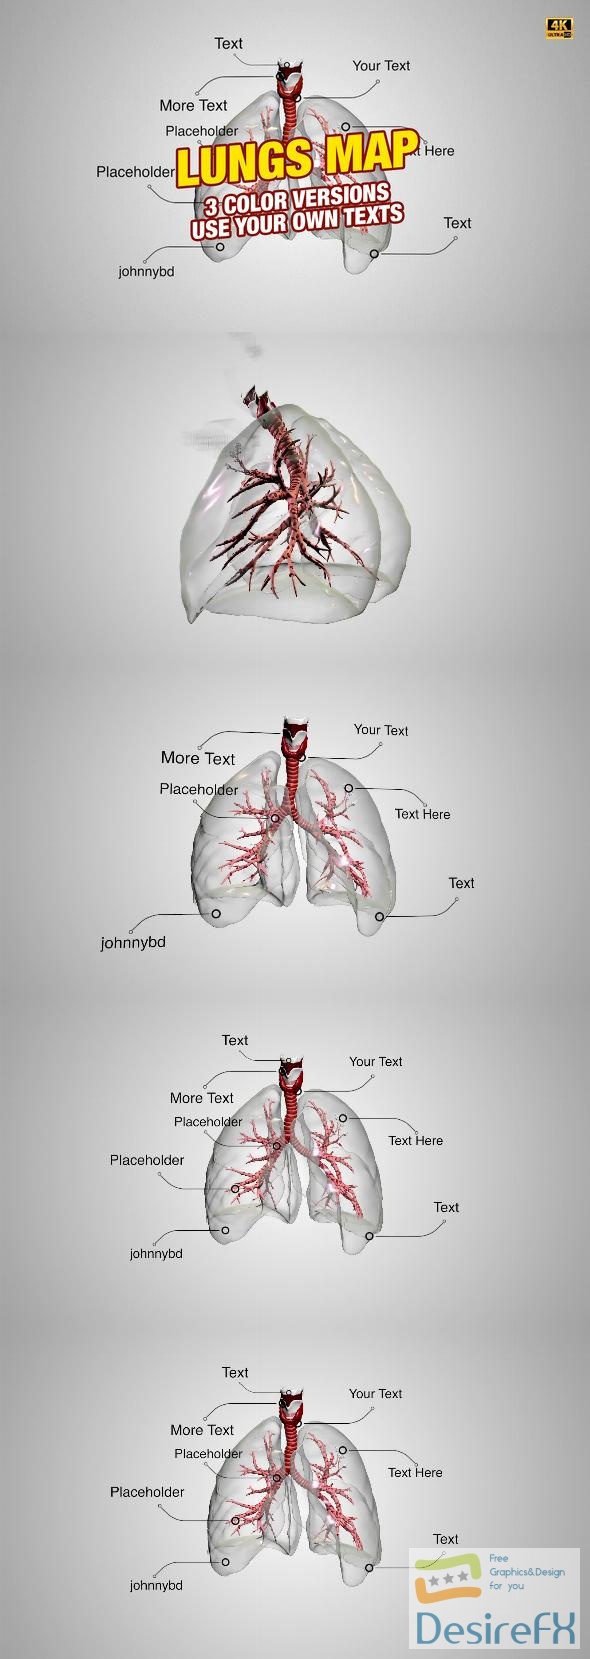 VideoHive Lungs Map 4K 31532621